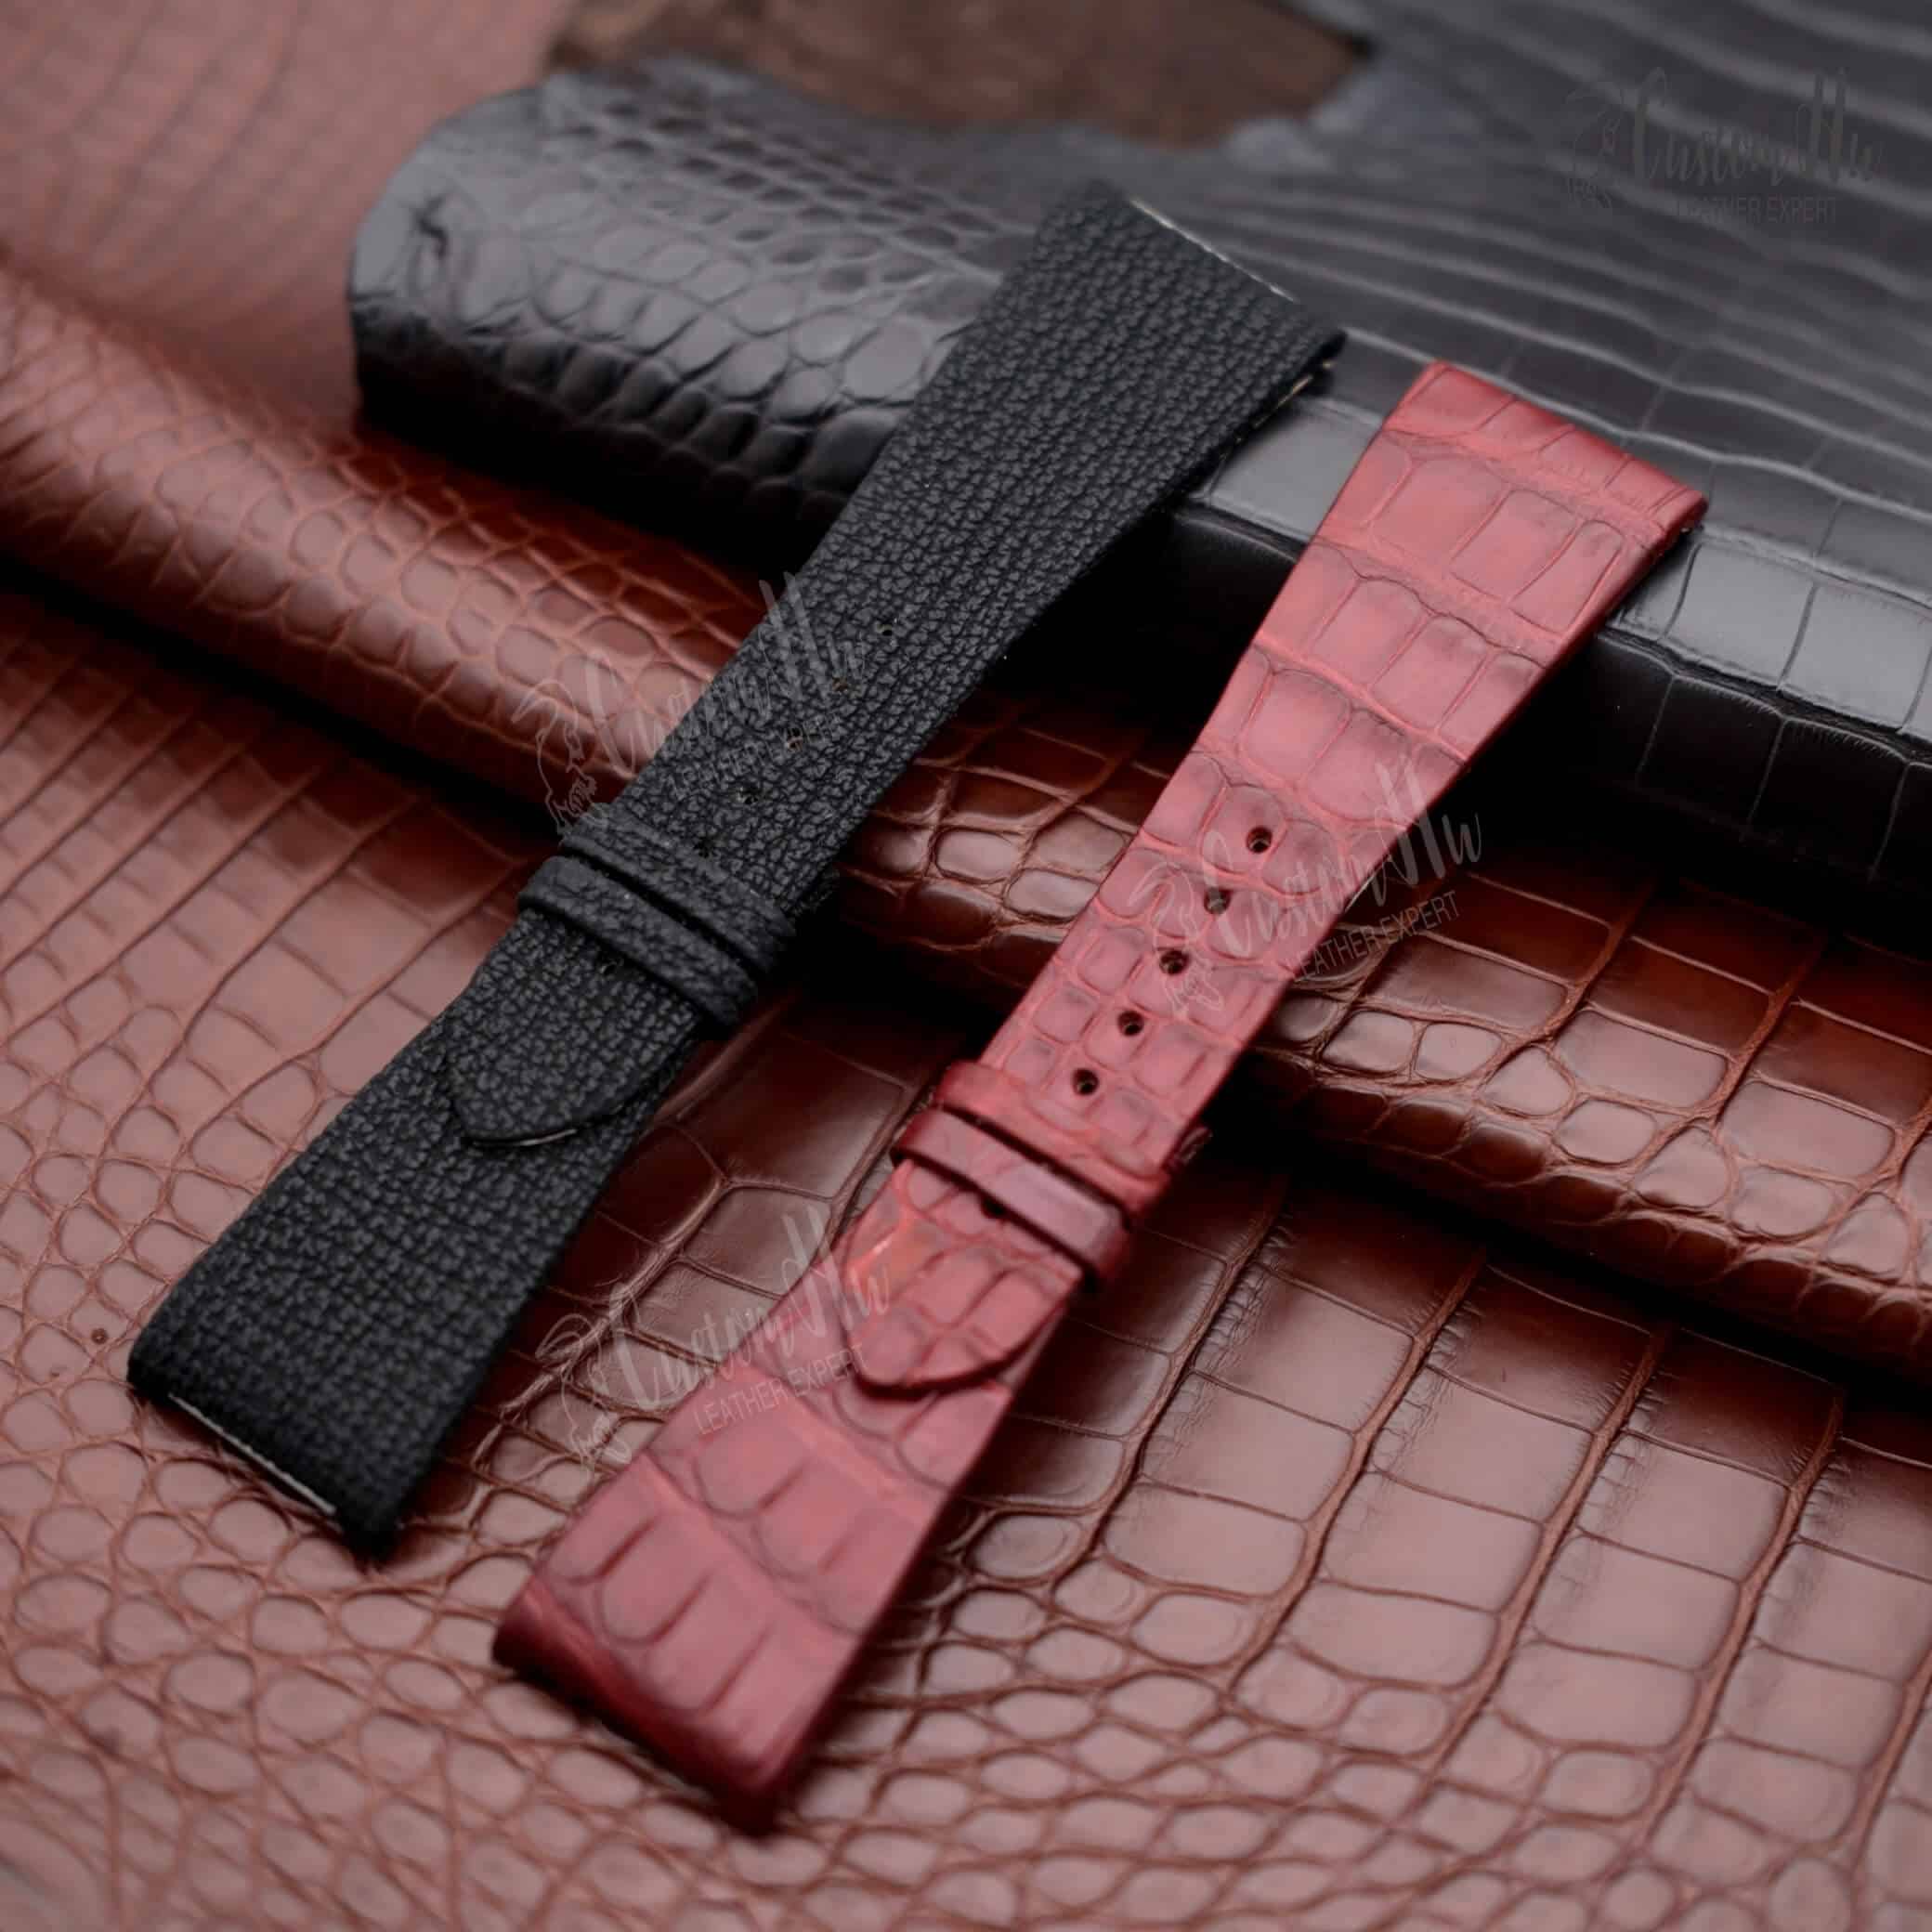 The Bvlgari Octo Collection and Leather Straps